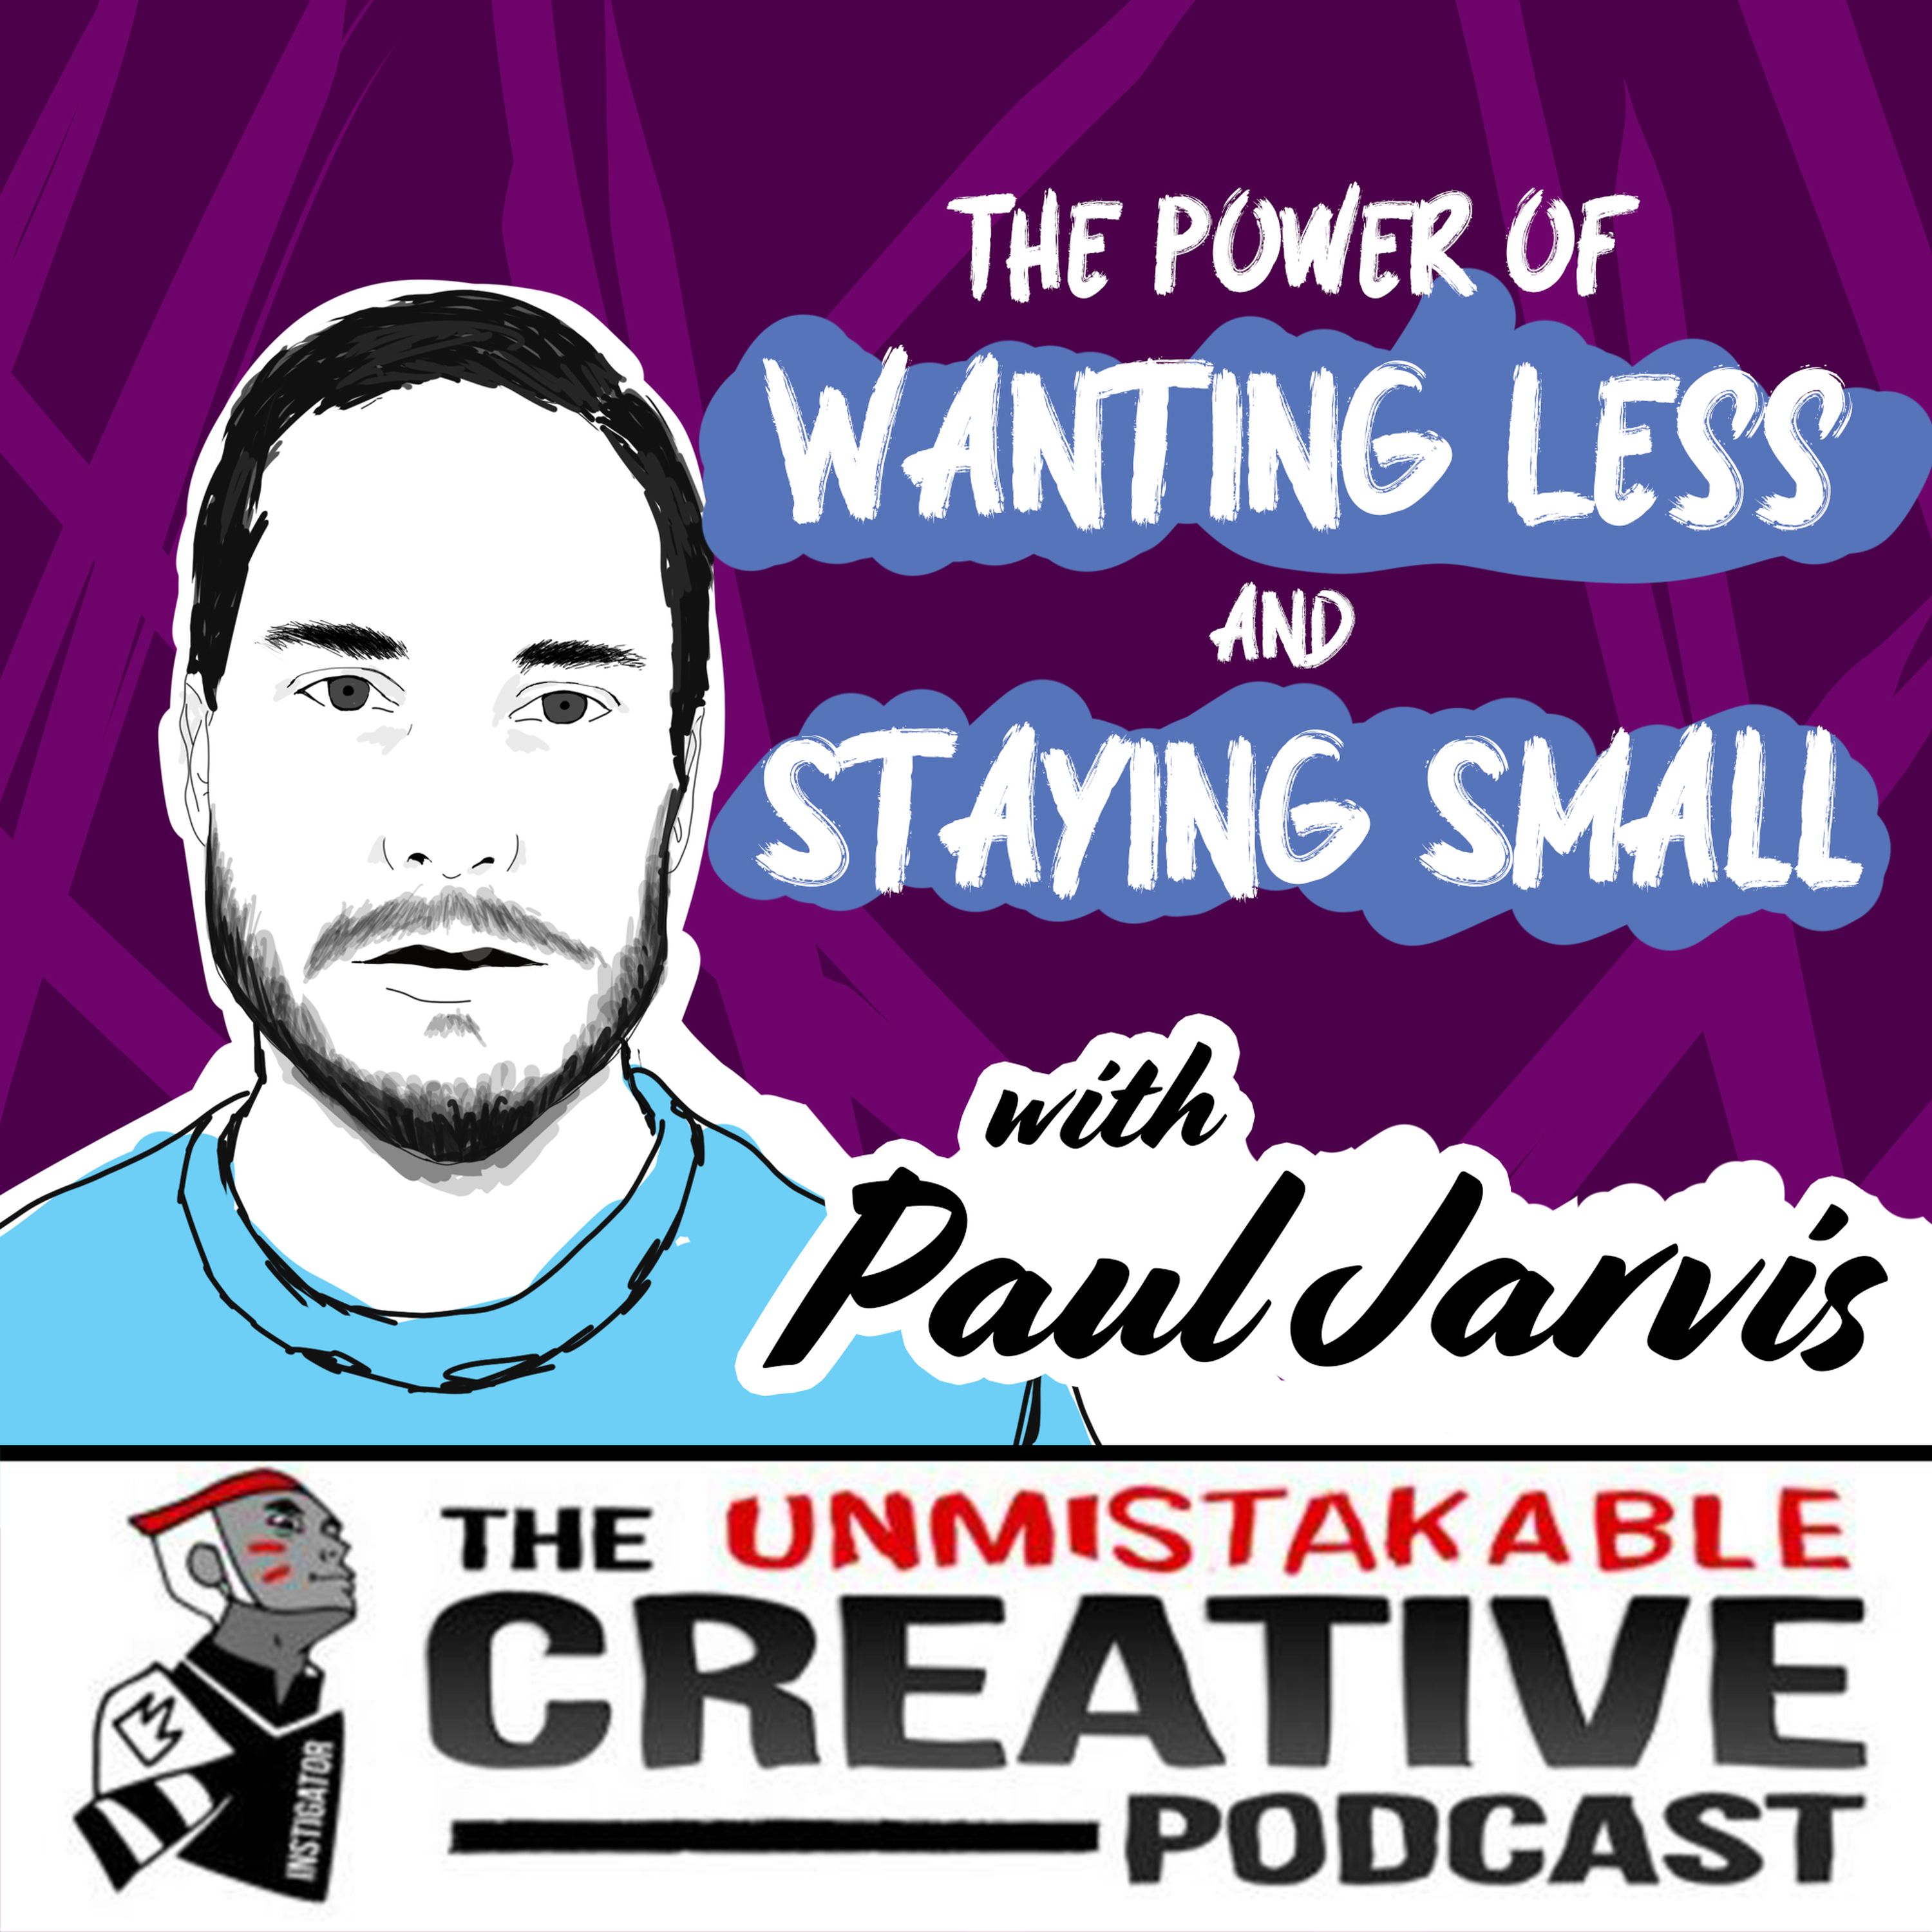 Listener Favorites: Paul Jarvis | The Power of Wanting Less and Staying Small Image